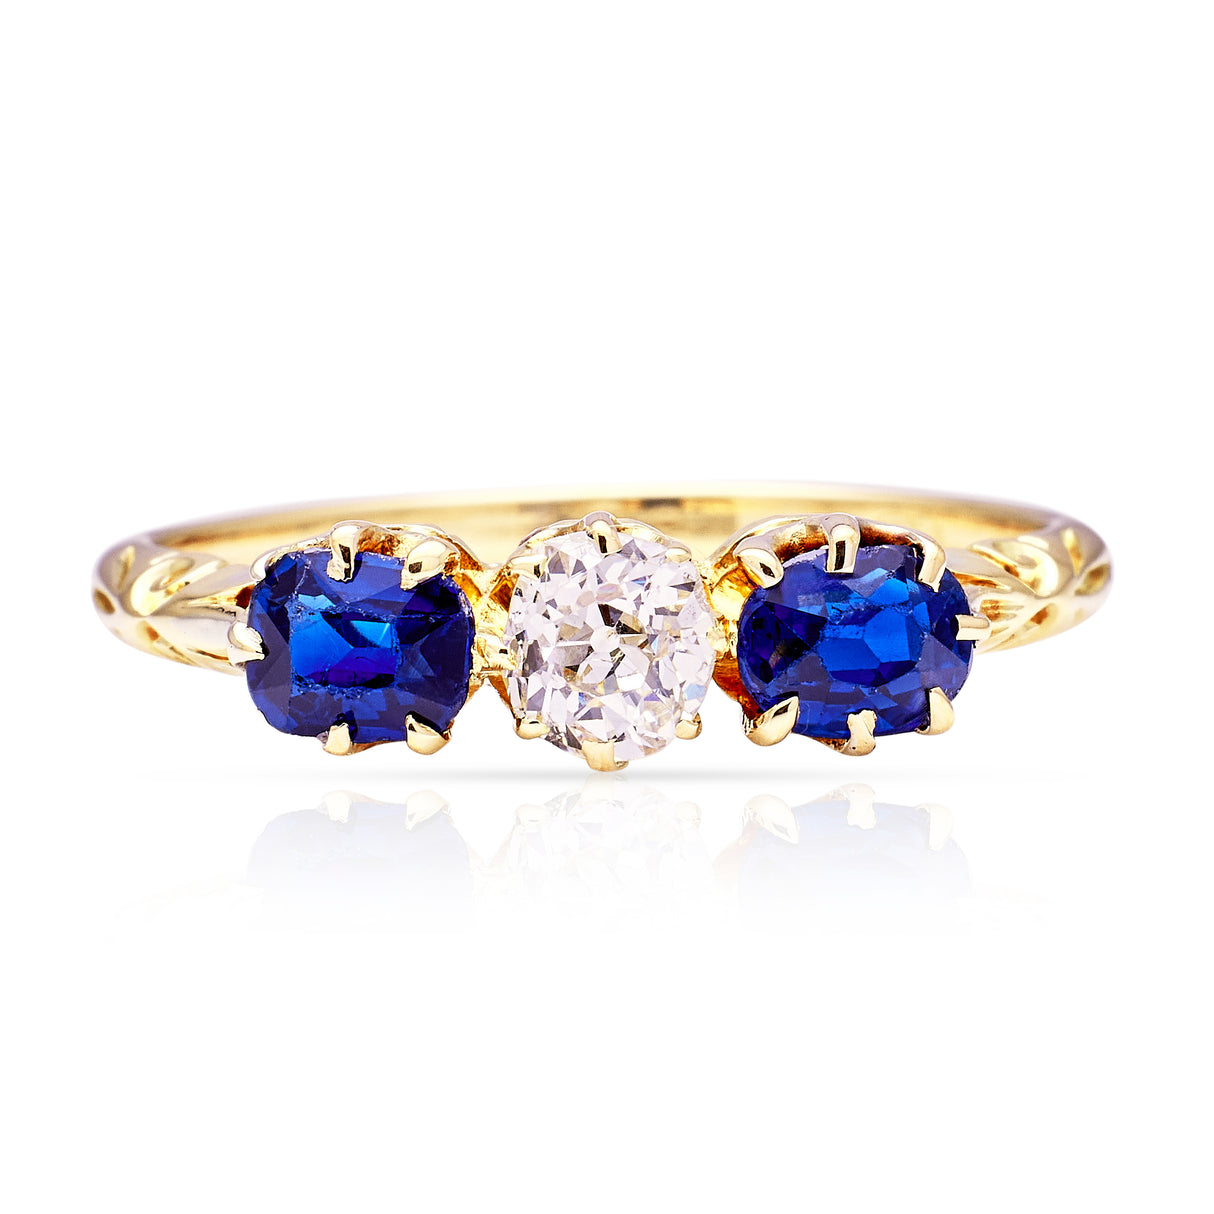 Antique, Edwardian Diamond and Sapphire Engagement Ring, 18ct Yellow Gold front view